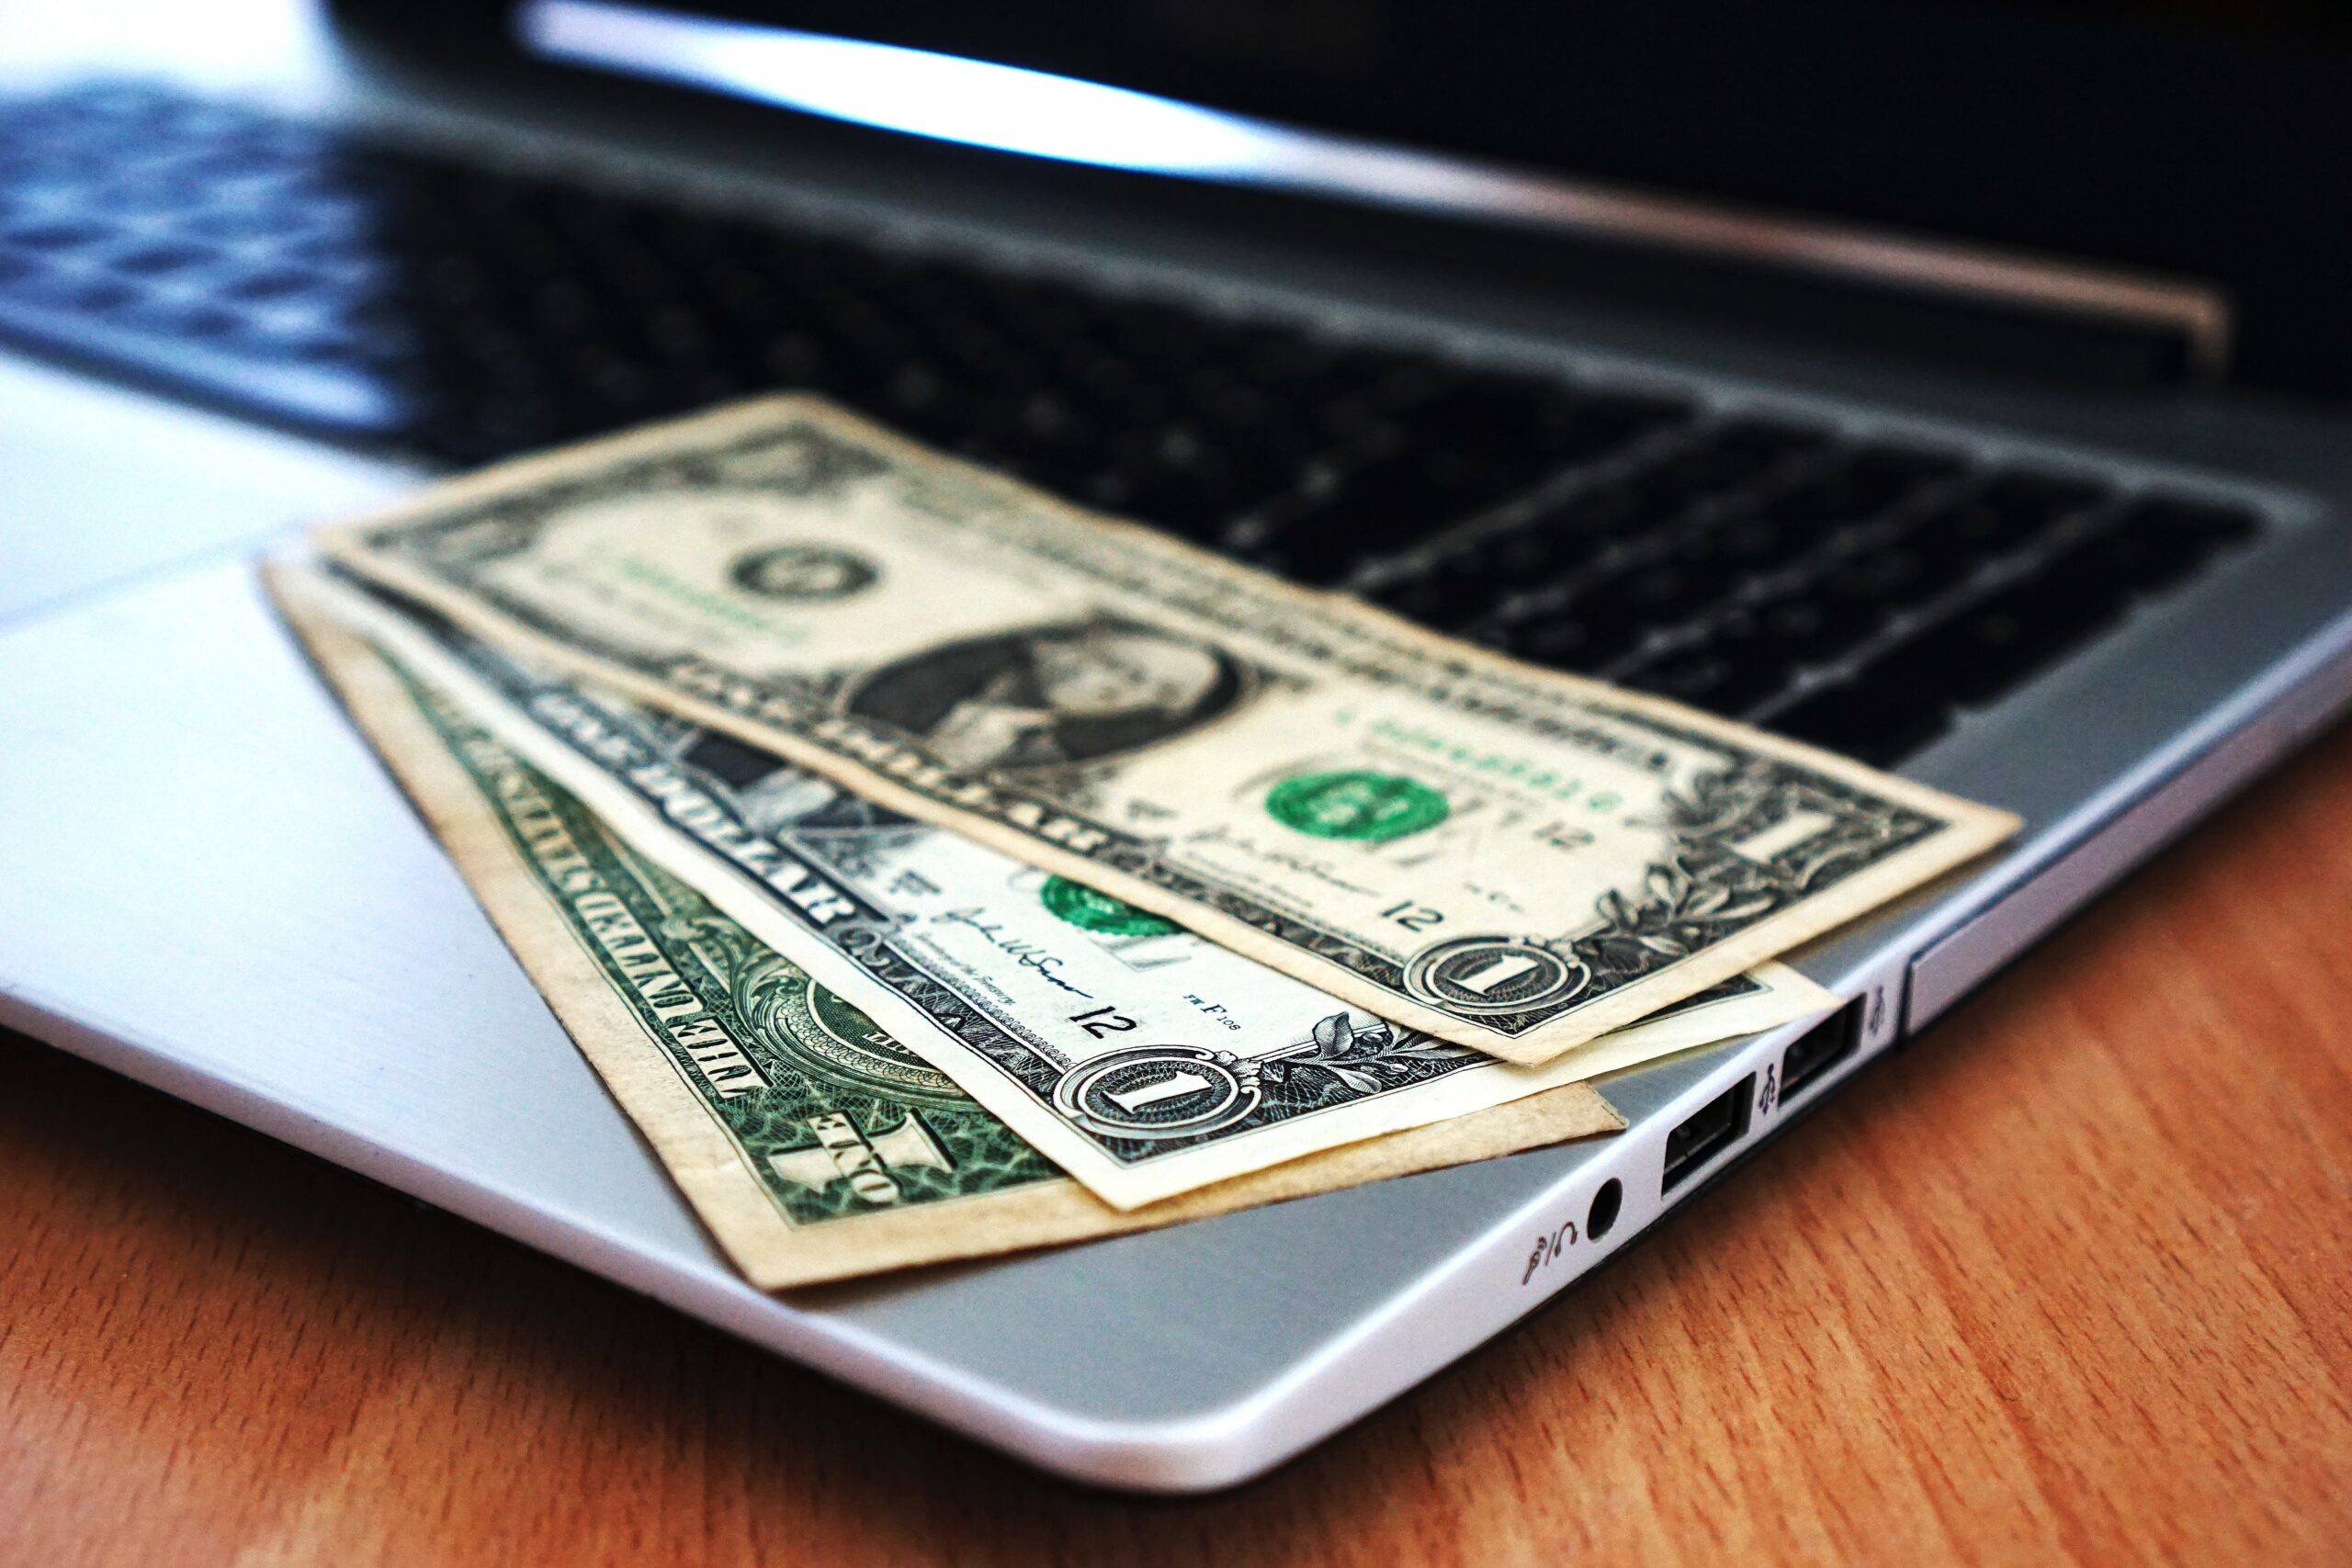 5 Realistic Ways To Make Money Online In 2020 & Beyond